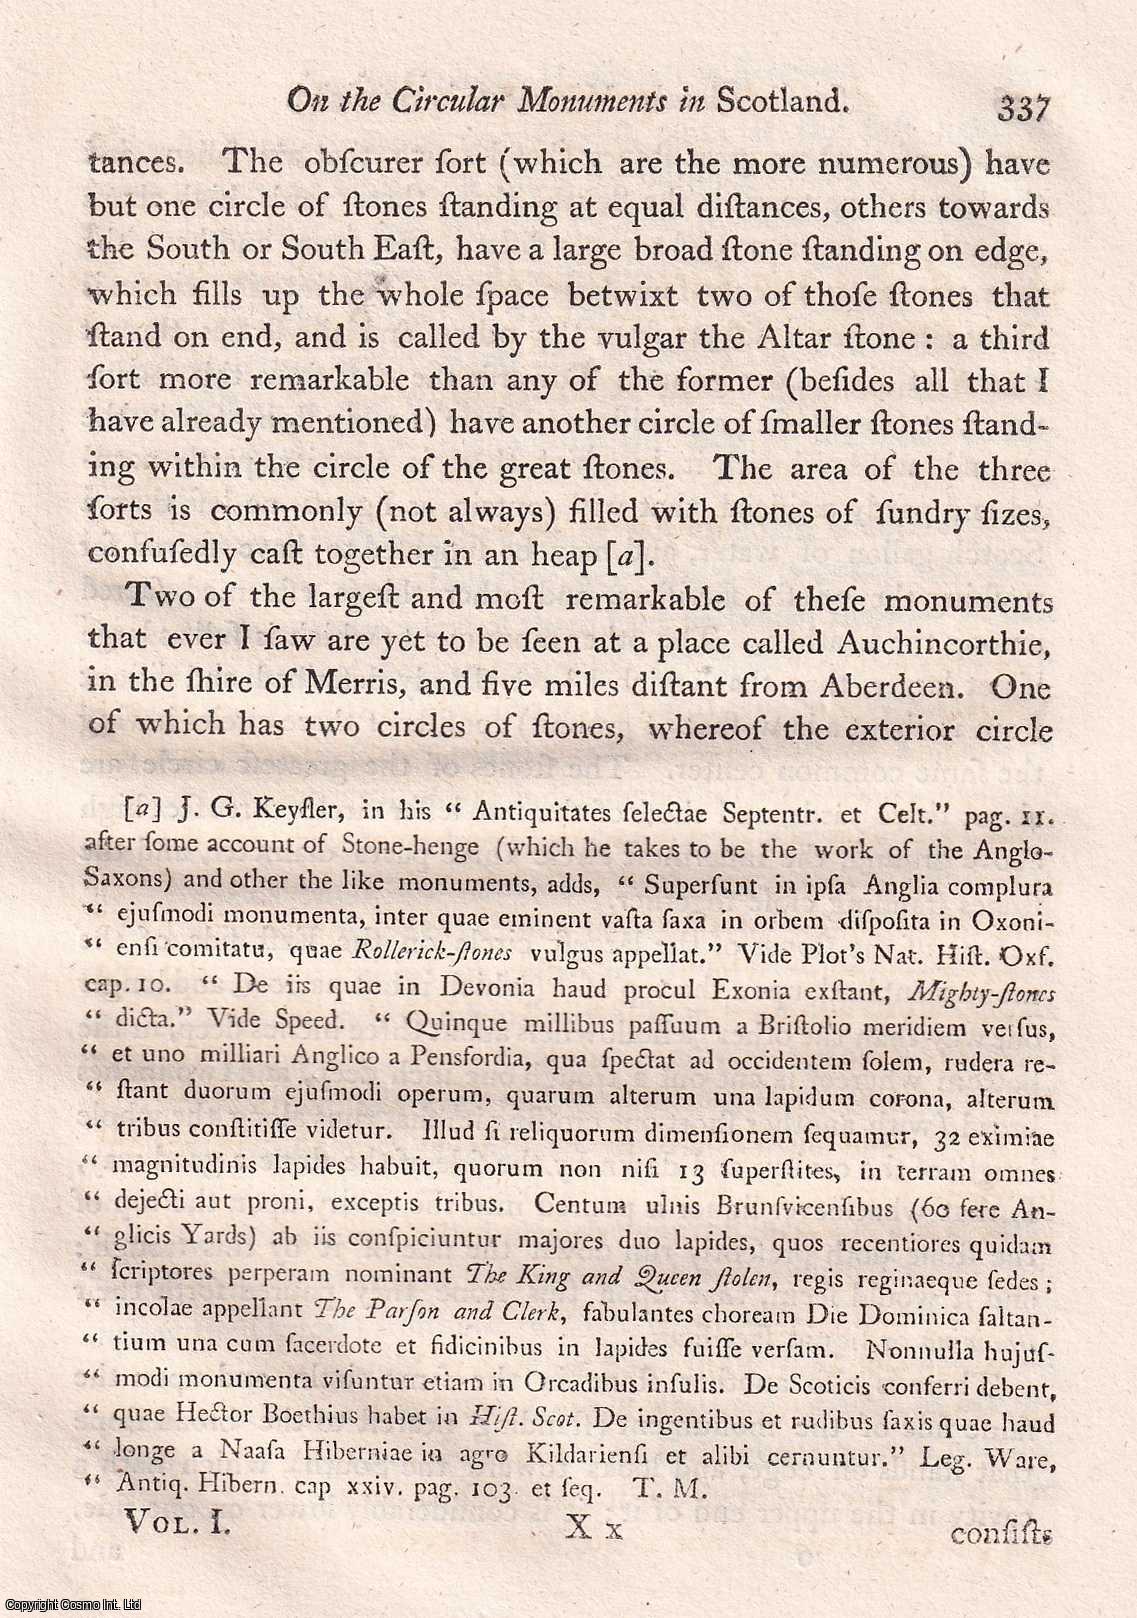 James Garden - On the Circular Stone Monuments in Scotland. An uncommon original article from the journal Archaeologia, 1770.